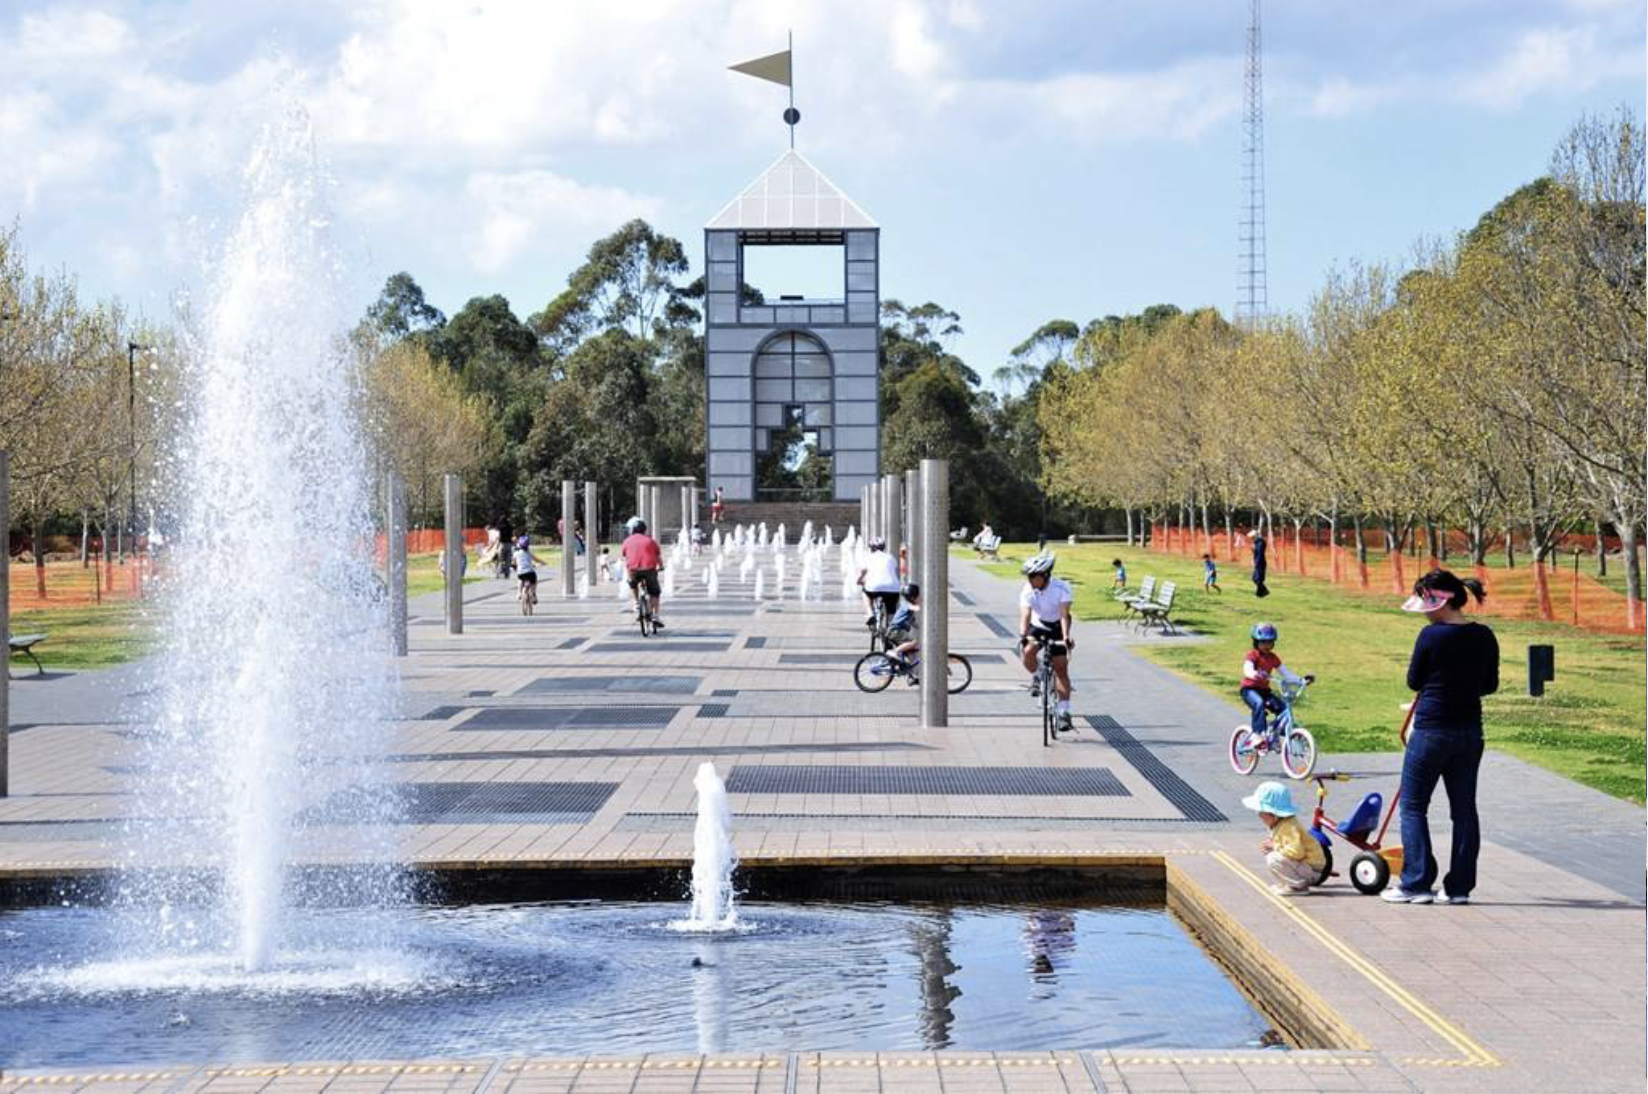 Join a local discussion about the Parramatta community